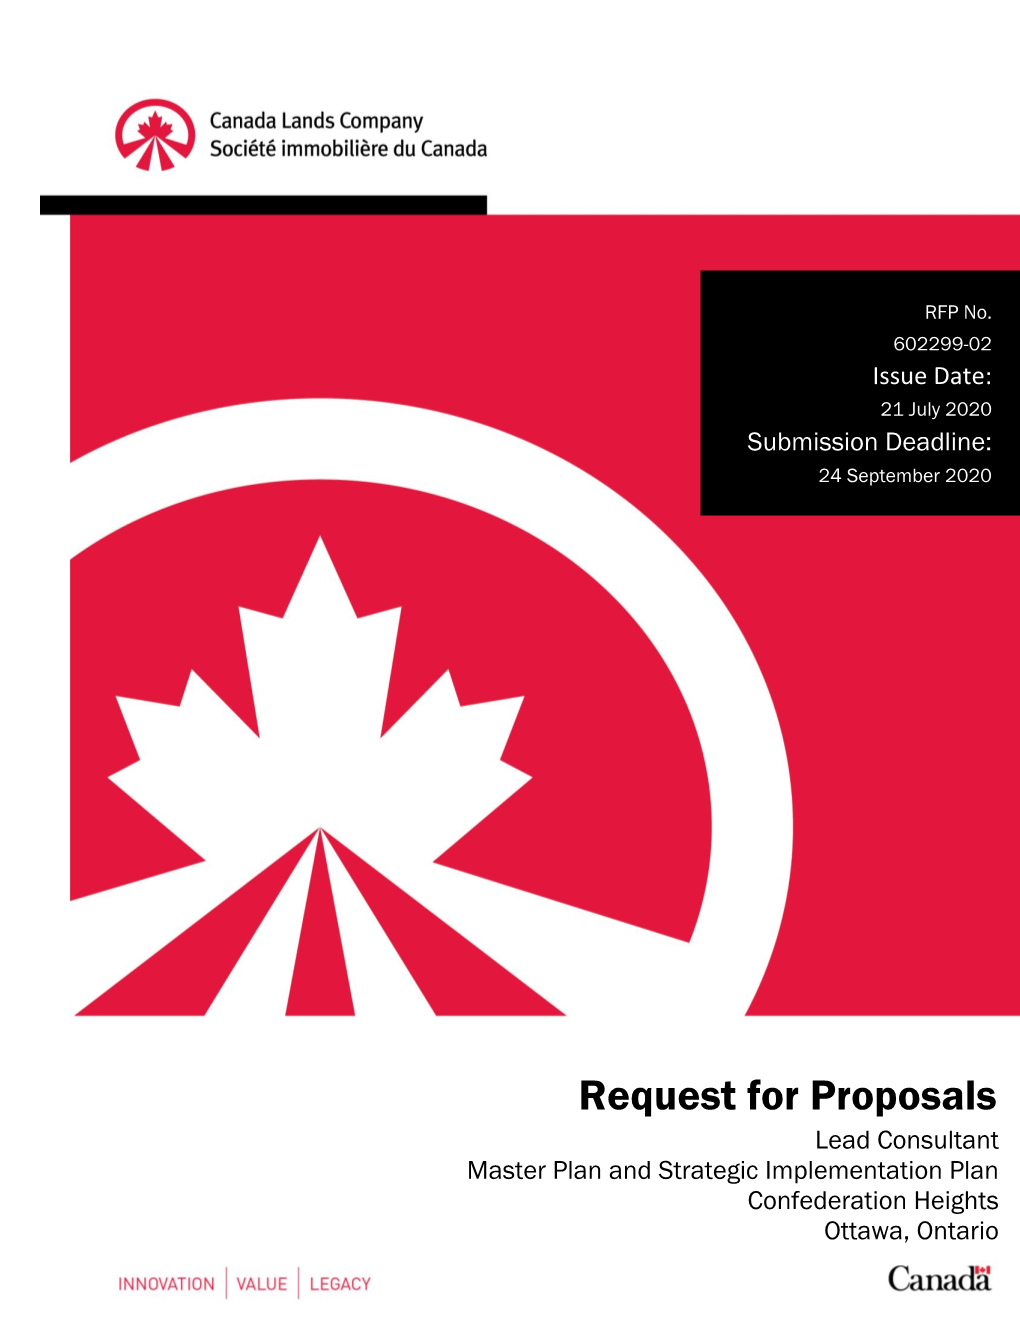 Request for Proposals Lead Consultant Master Plan and Strategic Implementation Plan Confederation Heights Ottawa, Ontario